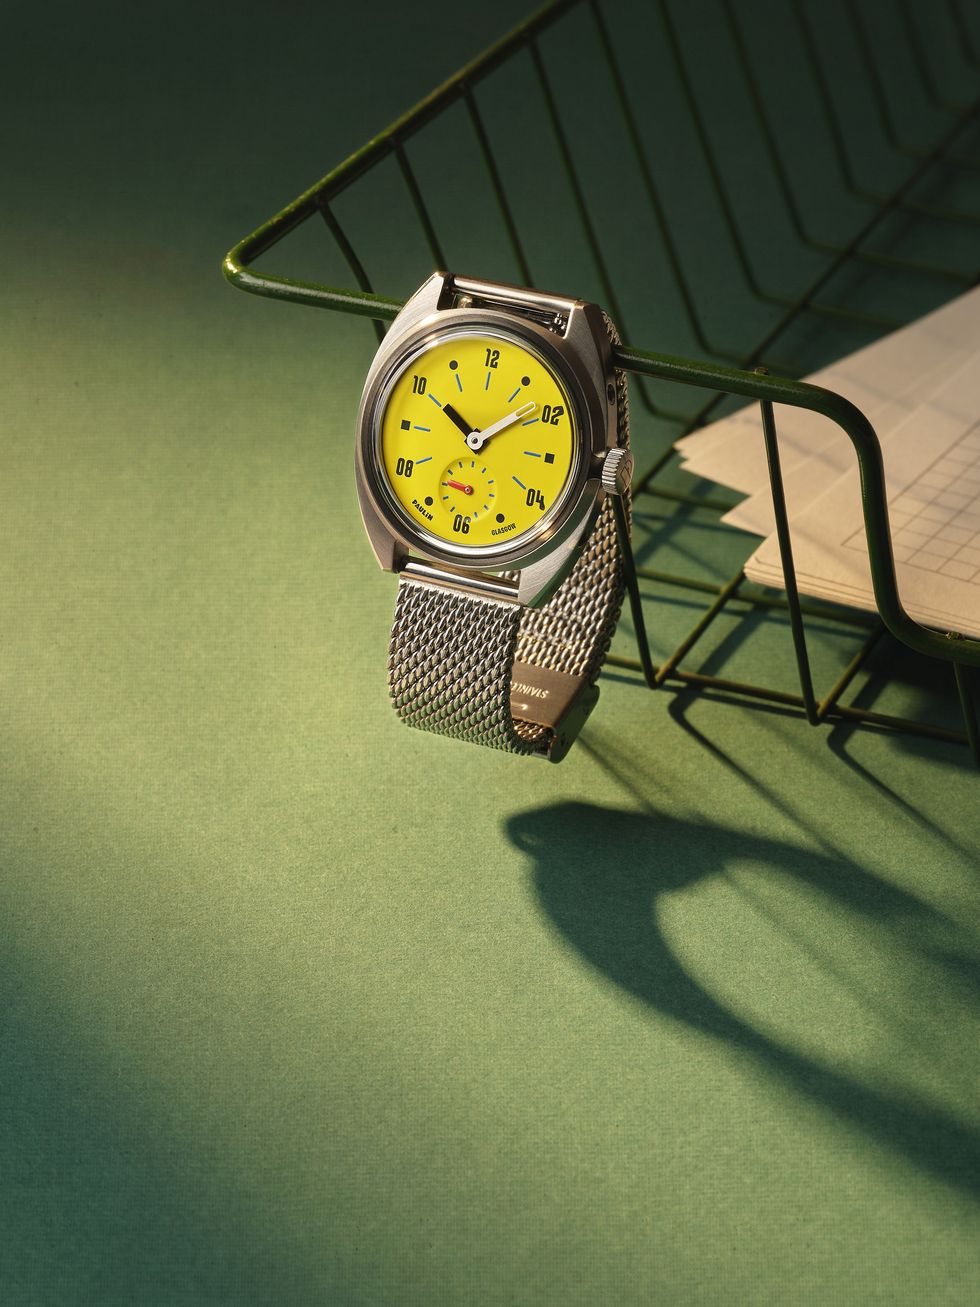 a watch on a chair